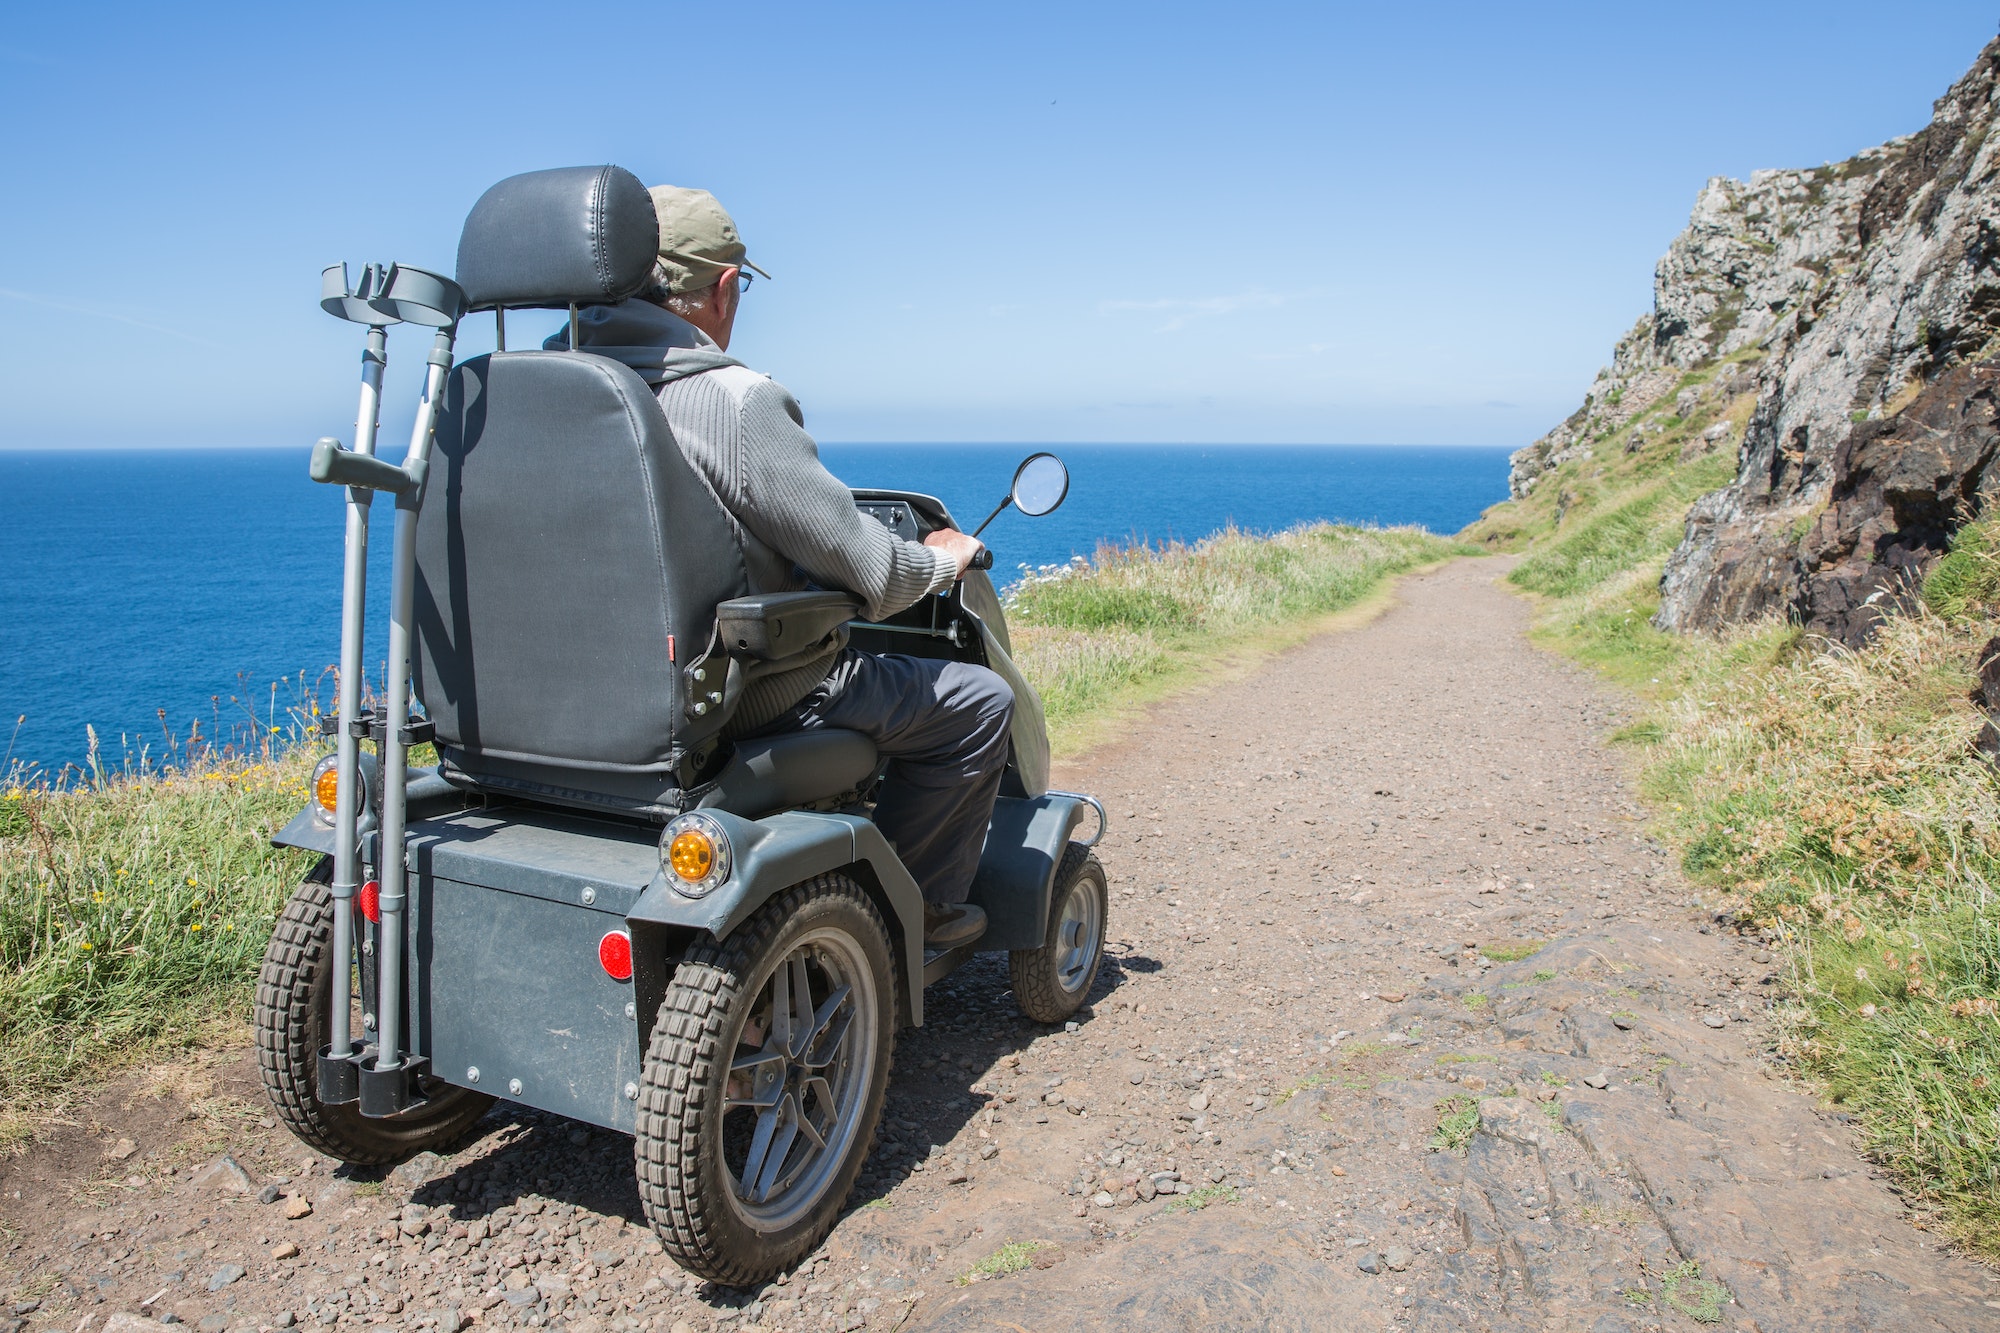 senior man riding a mobility scooter or tramper over rough terrain in an independence concept image